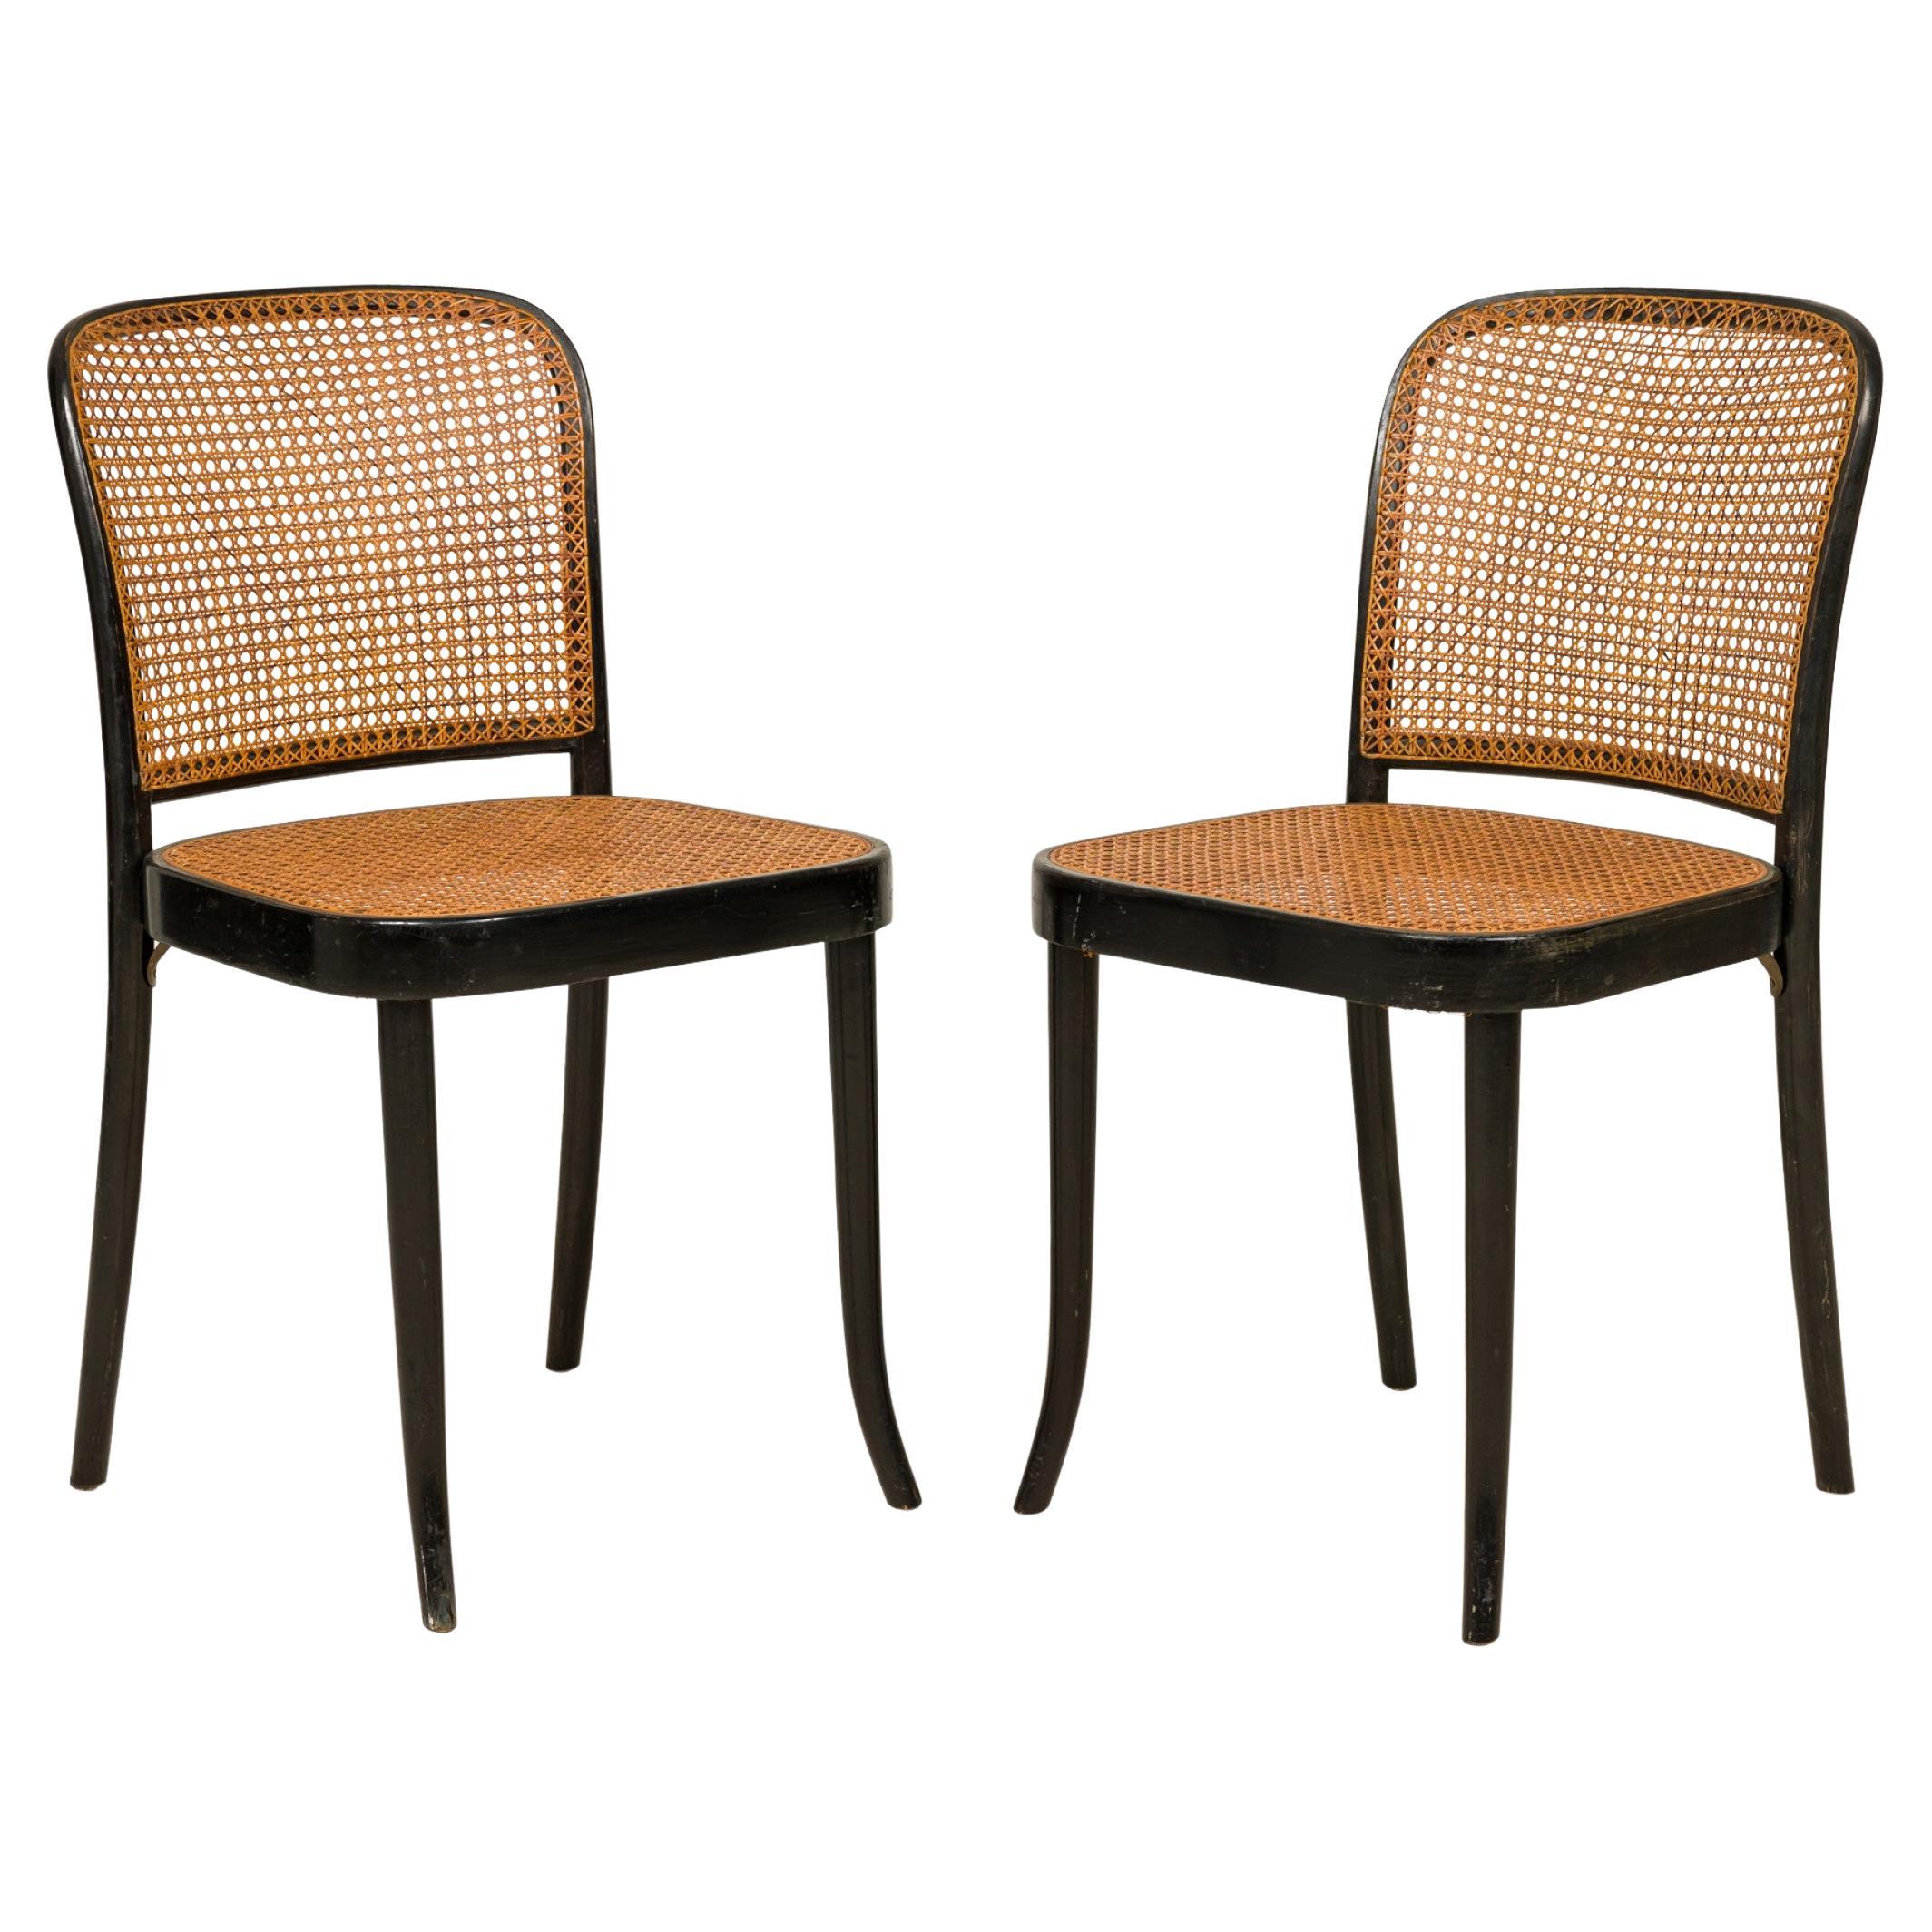 Set of 7 Thonet Bentwood Caned Dining Chairs